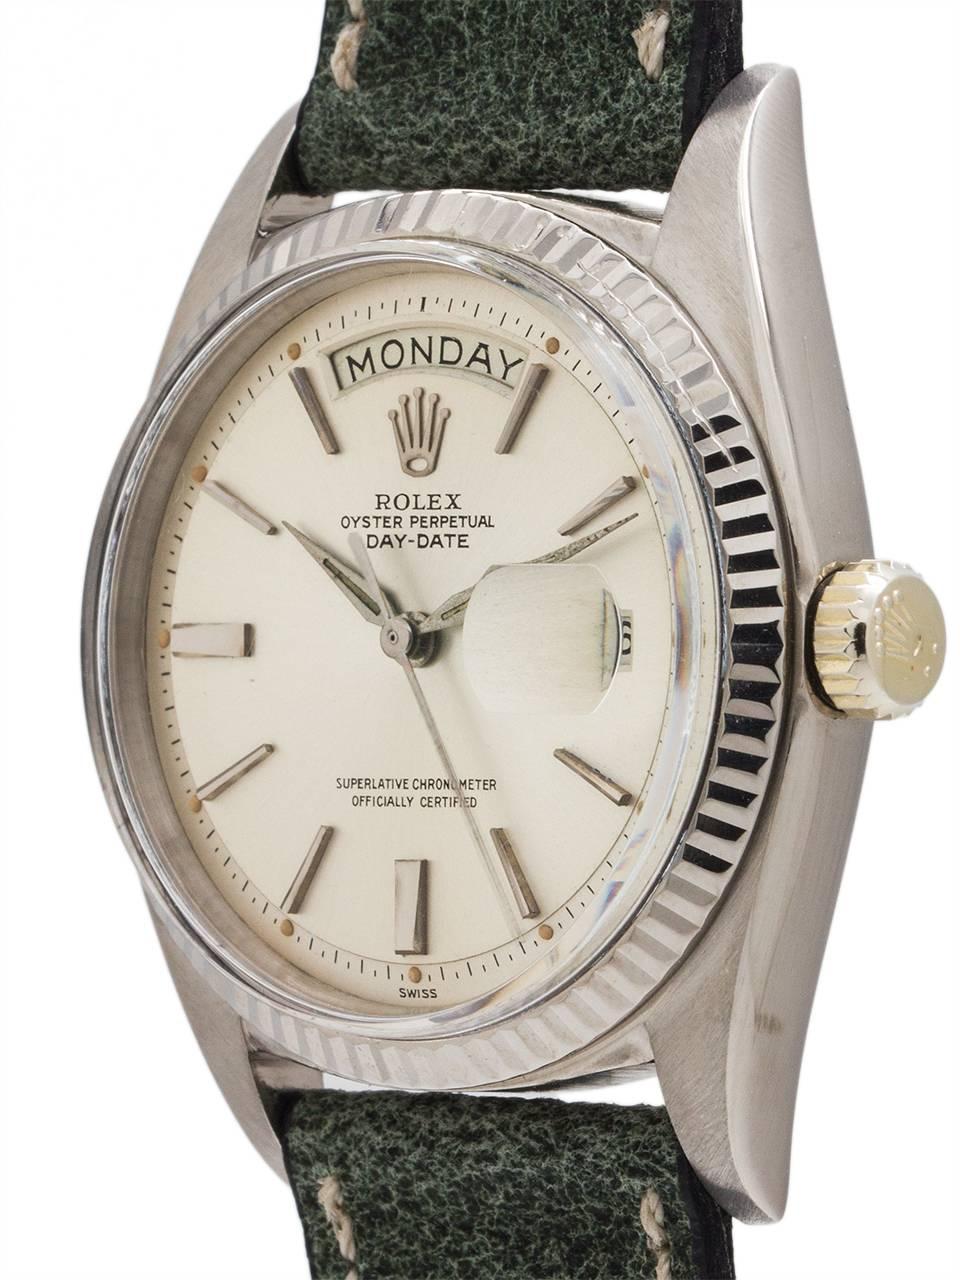 Very nice condition early example vintage Rolex Day Date President ref 1803 serial # 890,xxx circa 1963. Featuring 36mm diameter case with fluted bezel and acrylic crystal.  A very desirable example featuring an original silver satin pie pan dial